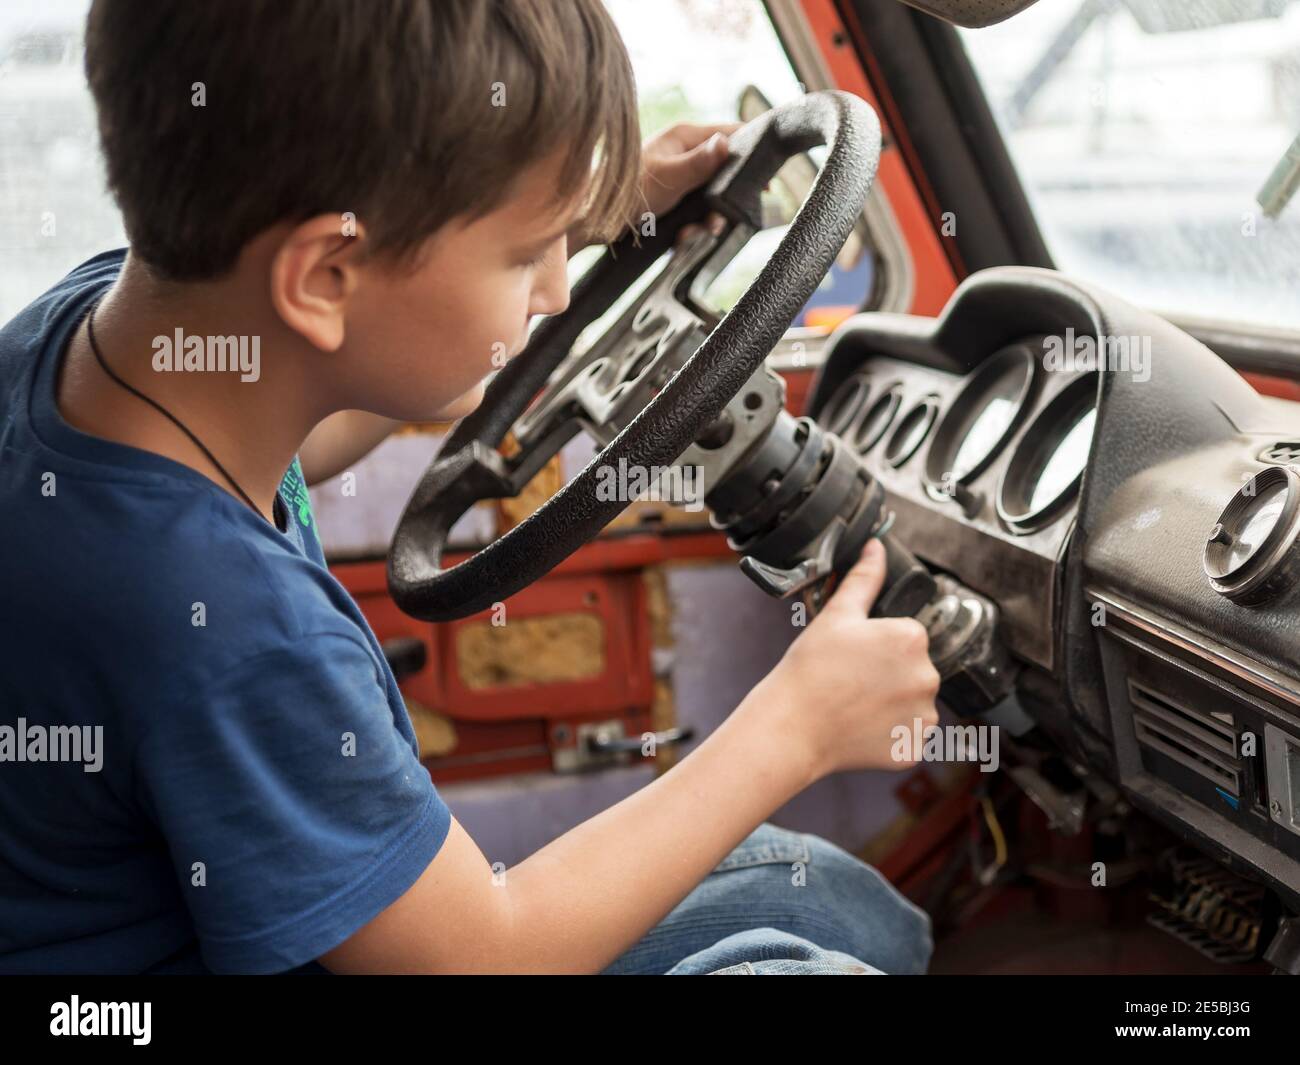 An 11-year-old boy enthusiastically plays the driver behind the wheel of an old abandoned car. Stock Photo